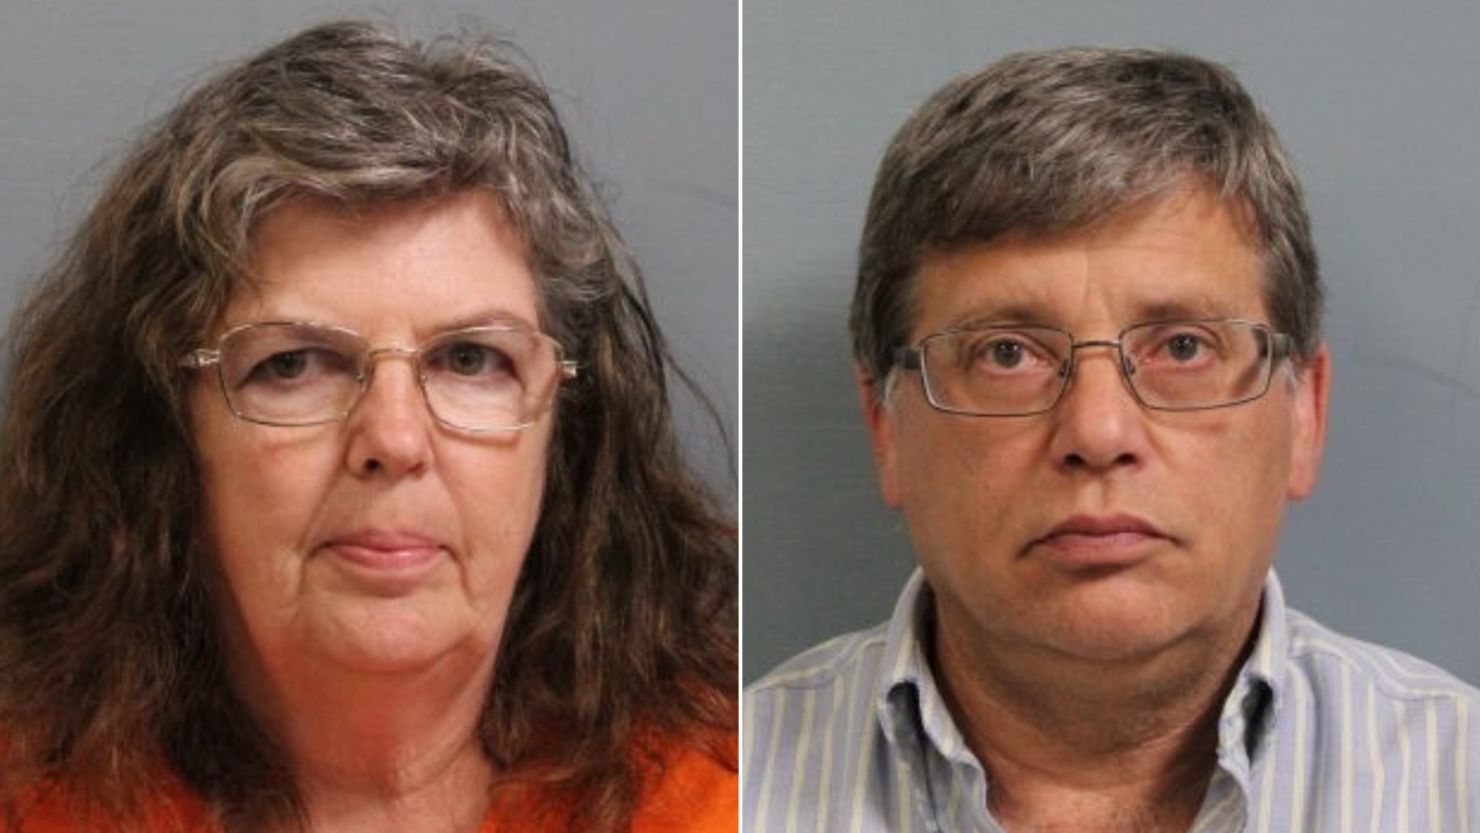 Jeanne Whitefeather and Donald Lantz are accused of adopting Black children and allegedly using them for "forced labor," according to an indictment.